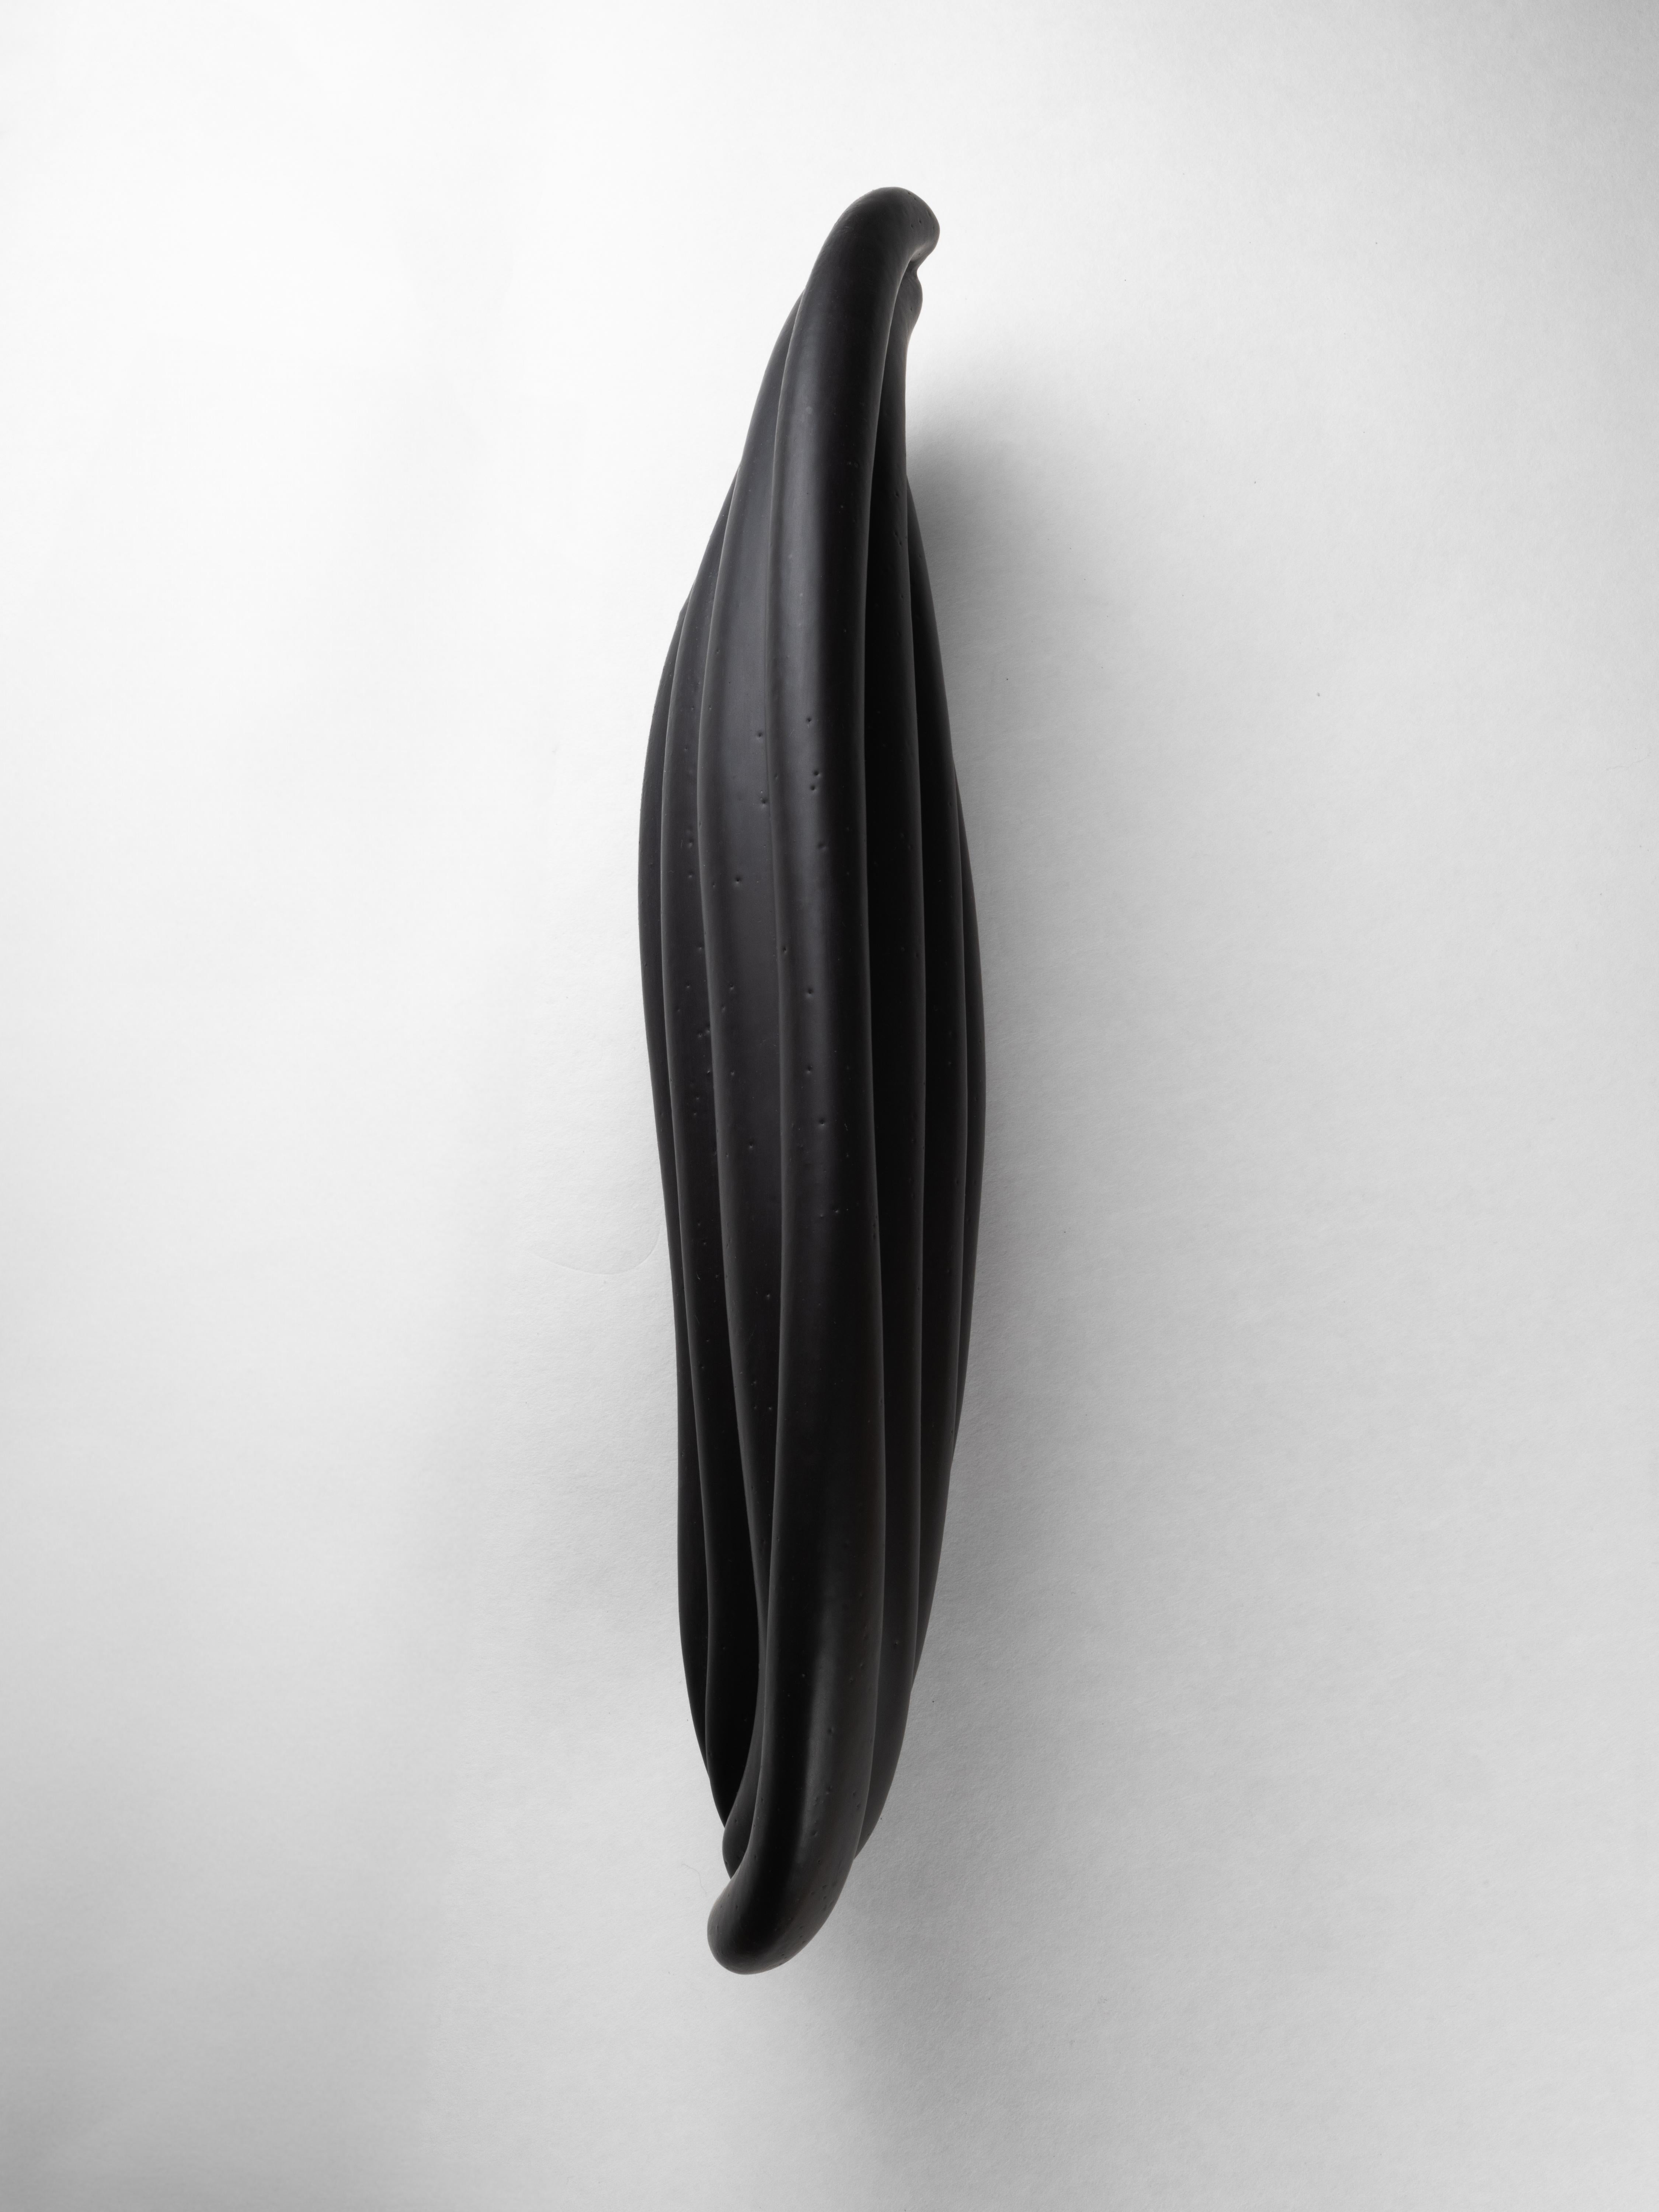 Reve Du Poe 3 Wall Sconce by Elsa Foulon
Unique Piece
Dimensions: D 12 x W 22,5 x H 58 cm.
Materials: Ceramic.

All our lamps can be wired according to each country. If sold to the USA, it will be wired for the USA, for instance. Please contact